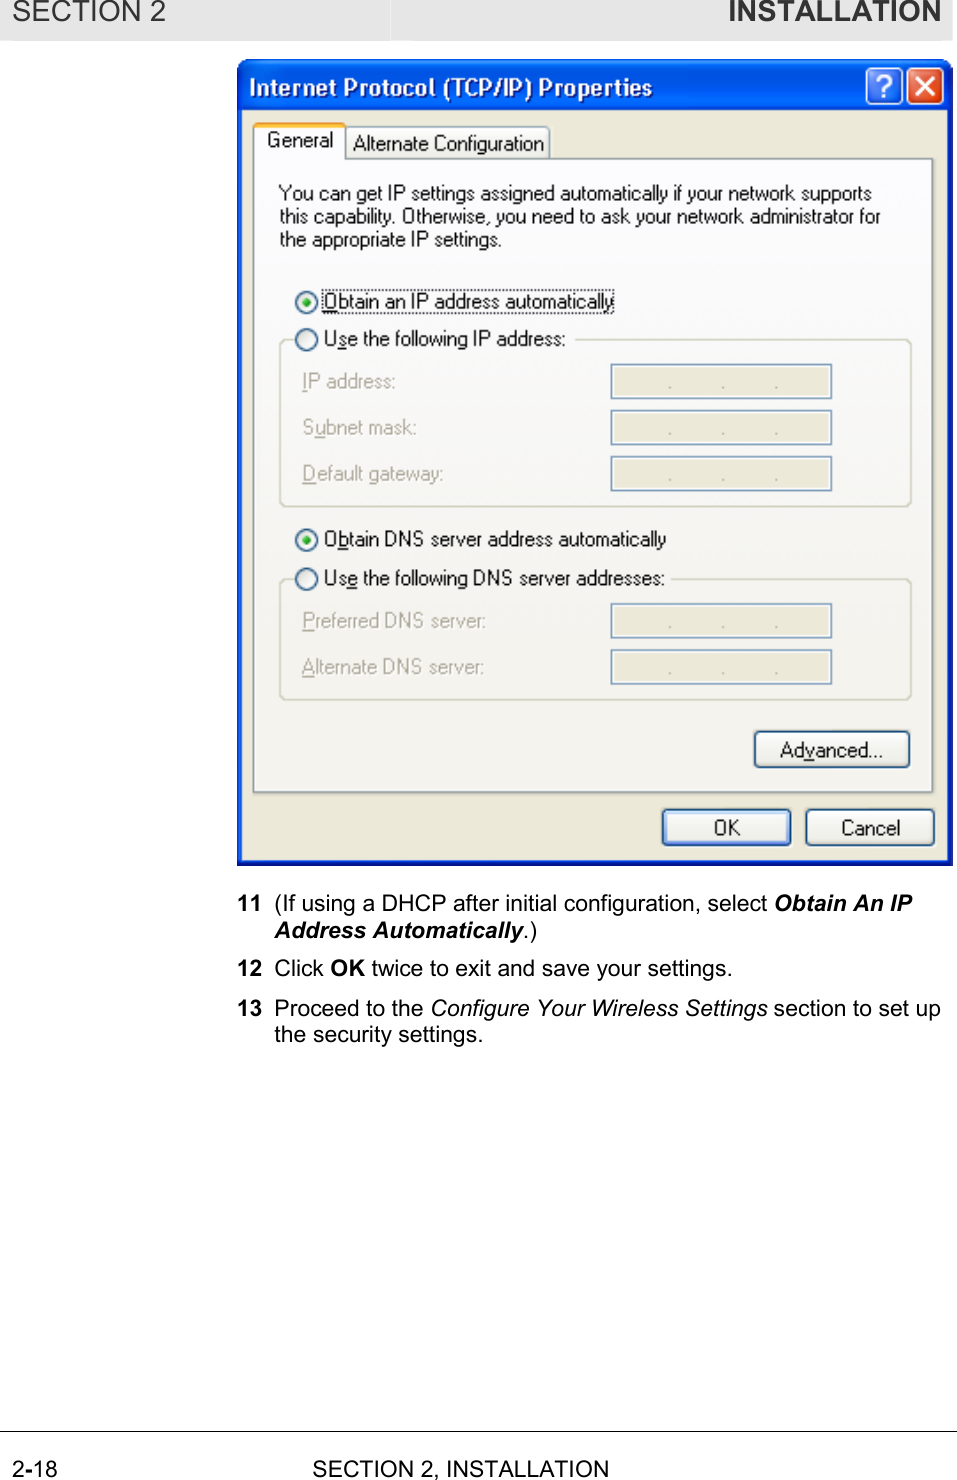 SECTION 2    INSTALLATION 2-18  SECTION 2, INSTALLATION   11  (If using a DHCP after initial configuration, select Obtain An IP Address Automatically.) 12  Click OK twice to exit and save your settings. 13  Proceed to the Configure Your Wireless Settings section to set up the security settings. 